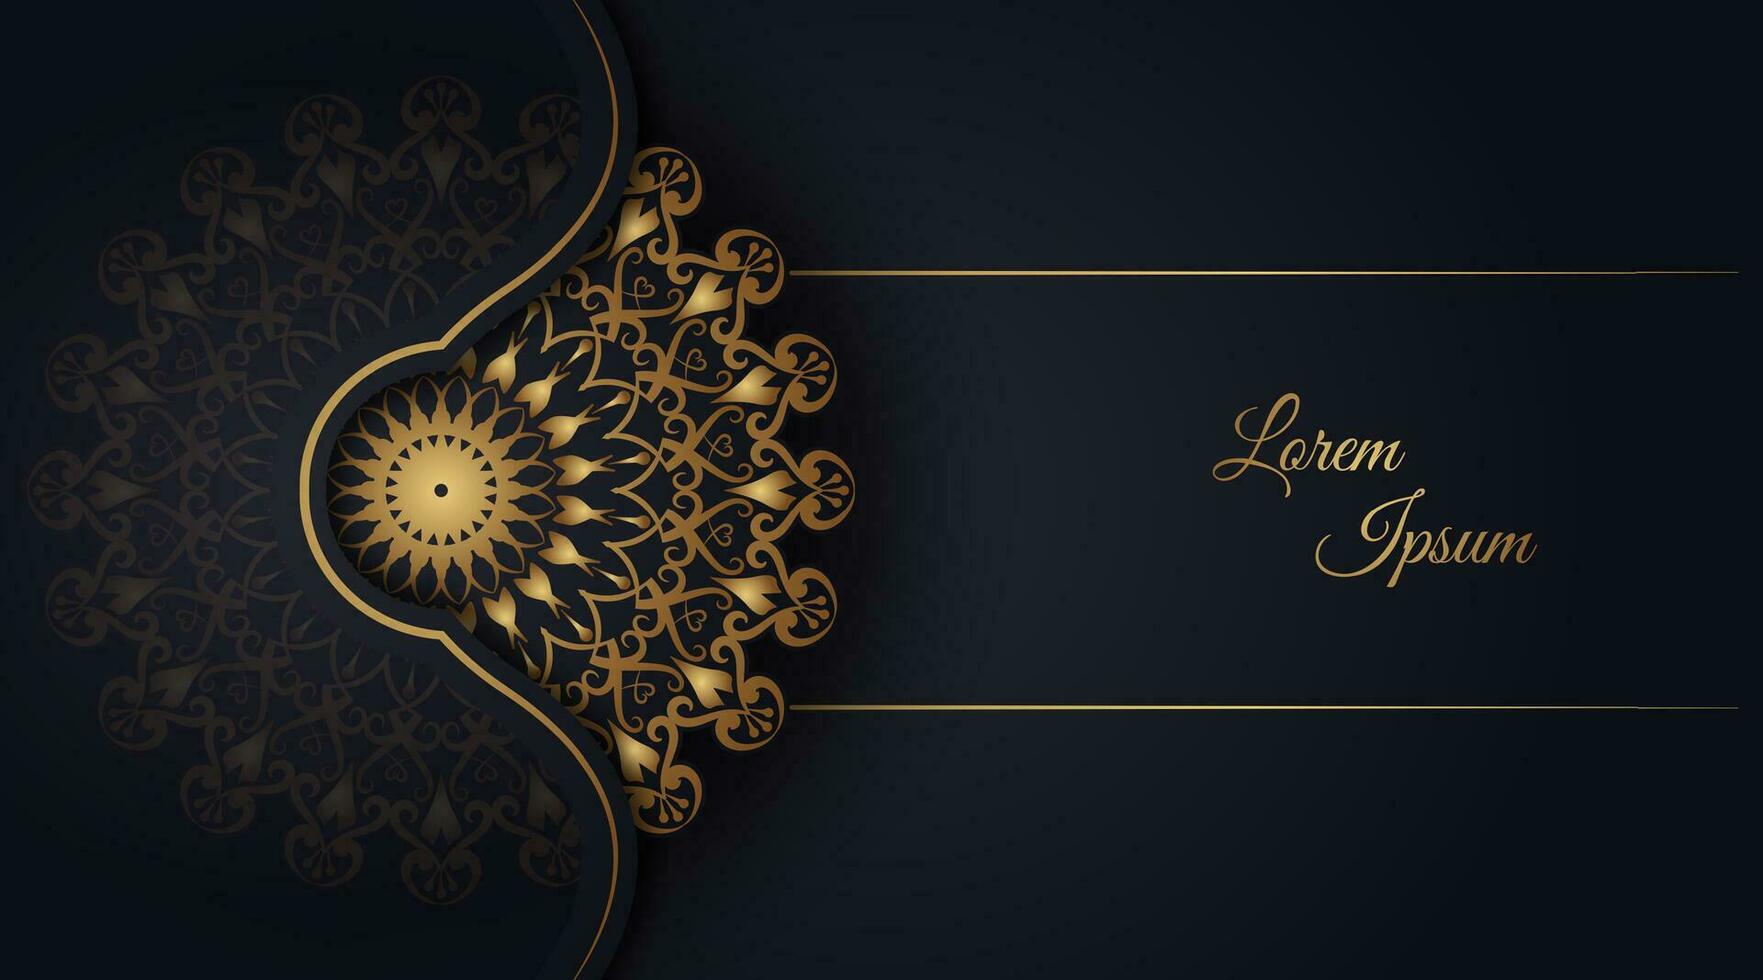 luxury background  with mandala ornament vector